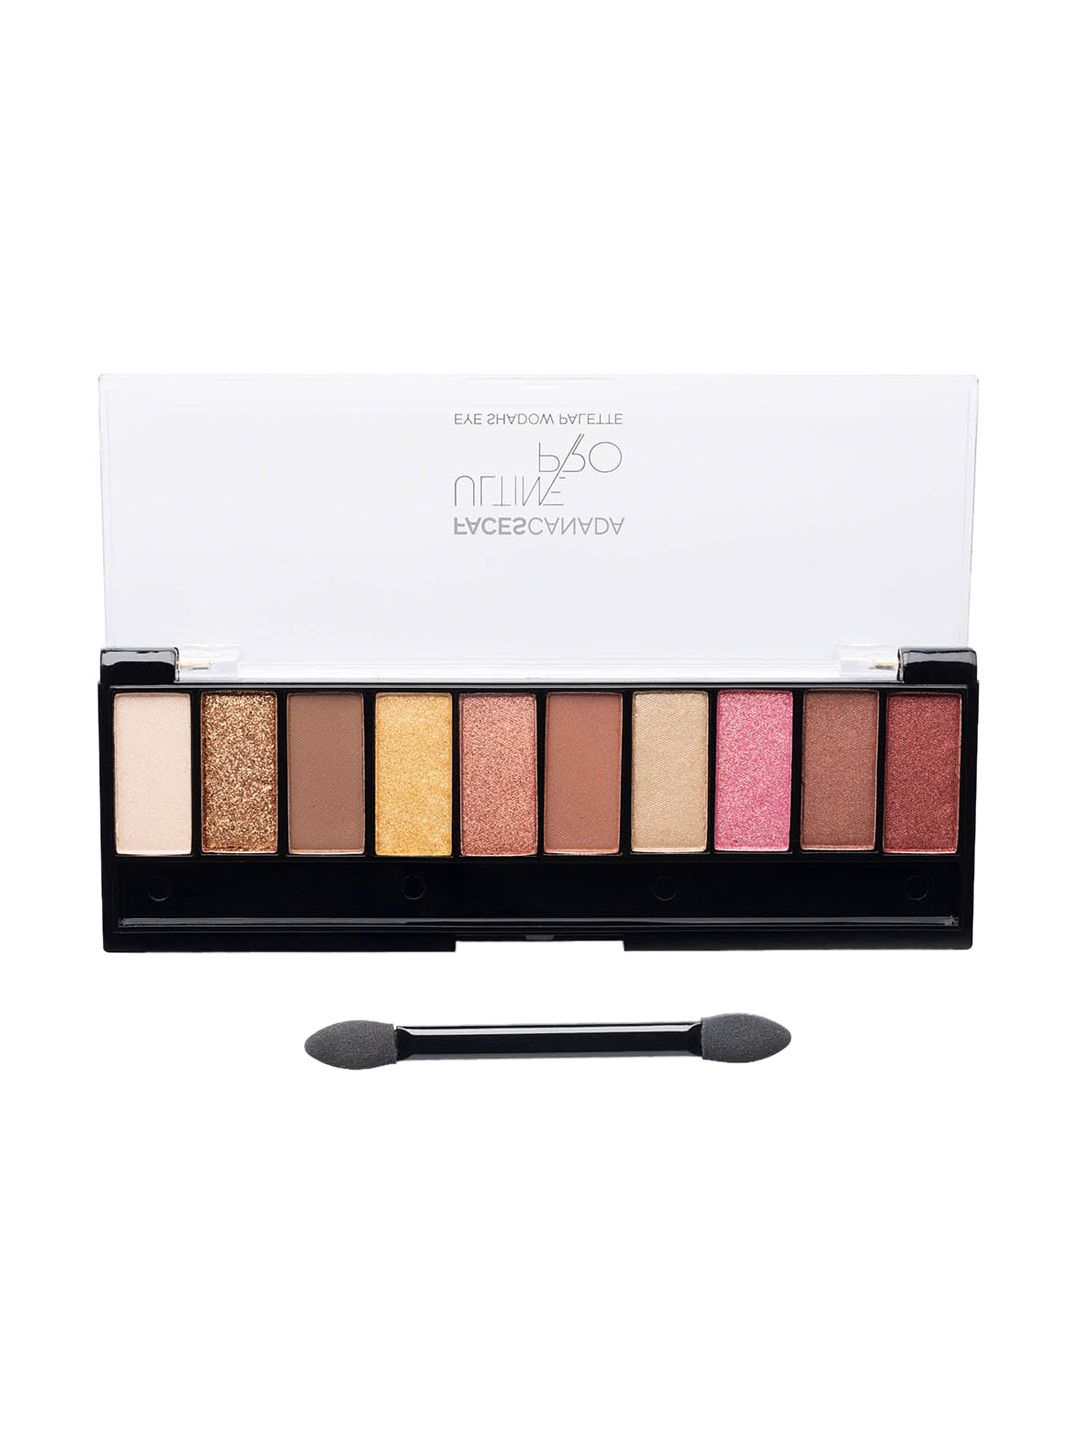 FACES CANADA Ultime Pro Eyeshadow Palette - Glimmer 03 Price in India